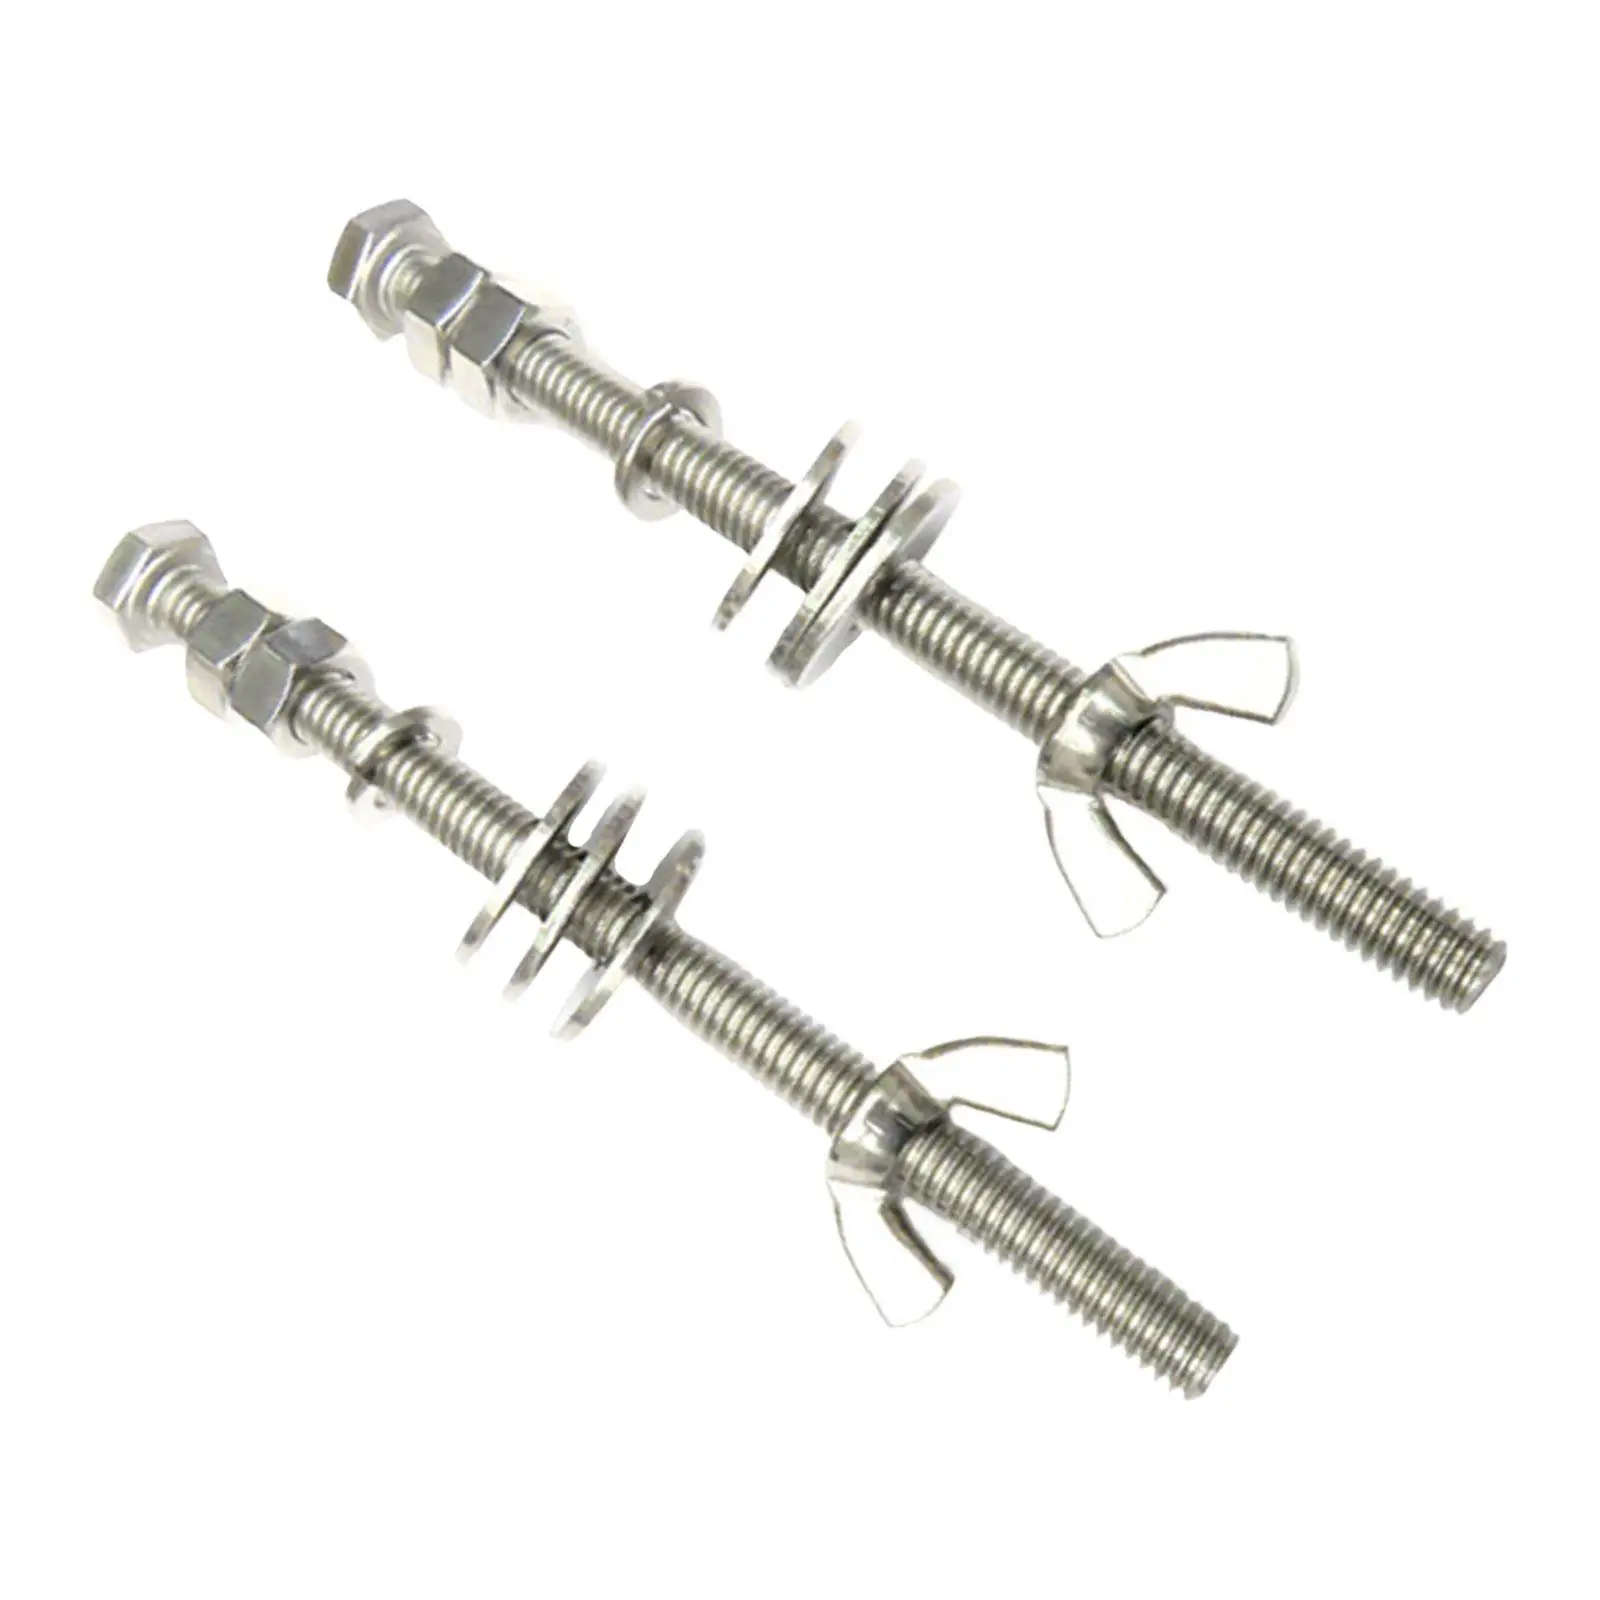 2Pcs Diving Butterfly Wing Nuts Screw Long Screws for Snorkeling Underwater